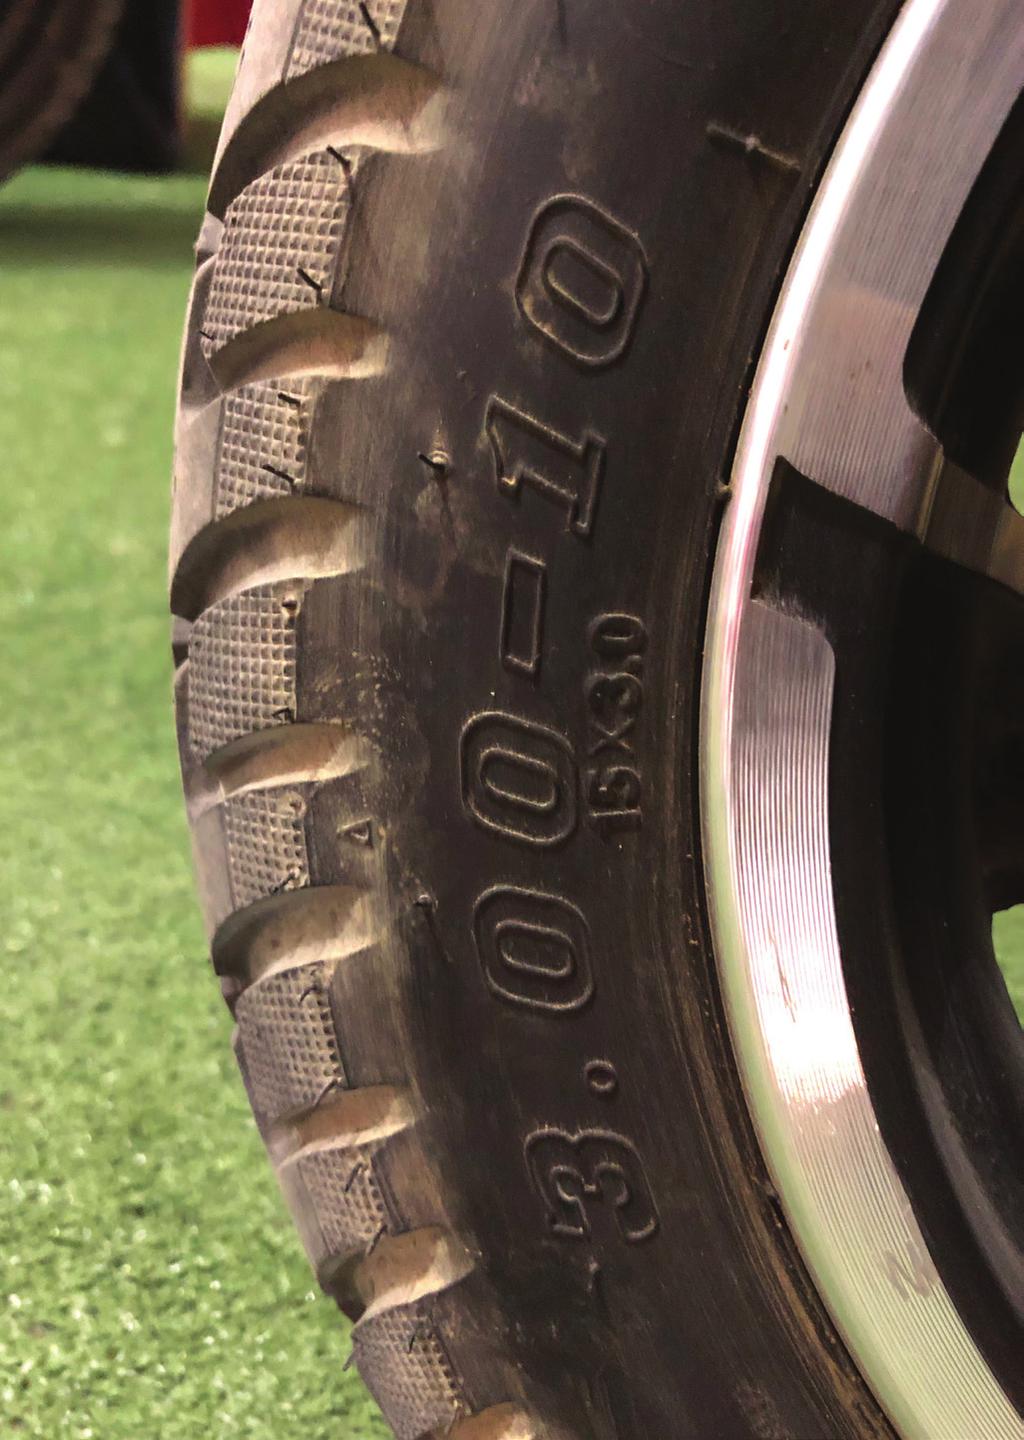 Tires Front and rear tire are identical, both a 3.00-10 tire. 10 inch diameter inside, by 3 inch wide. There are many options of tread pattern and style that you need consider if replacing your tire.